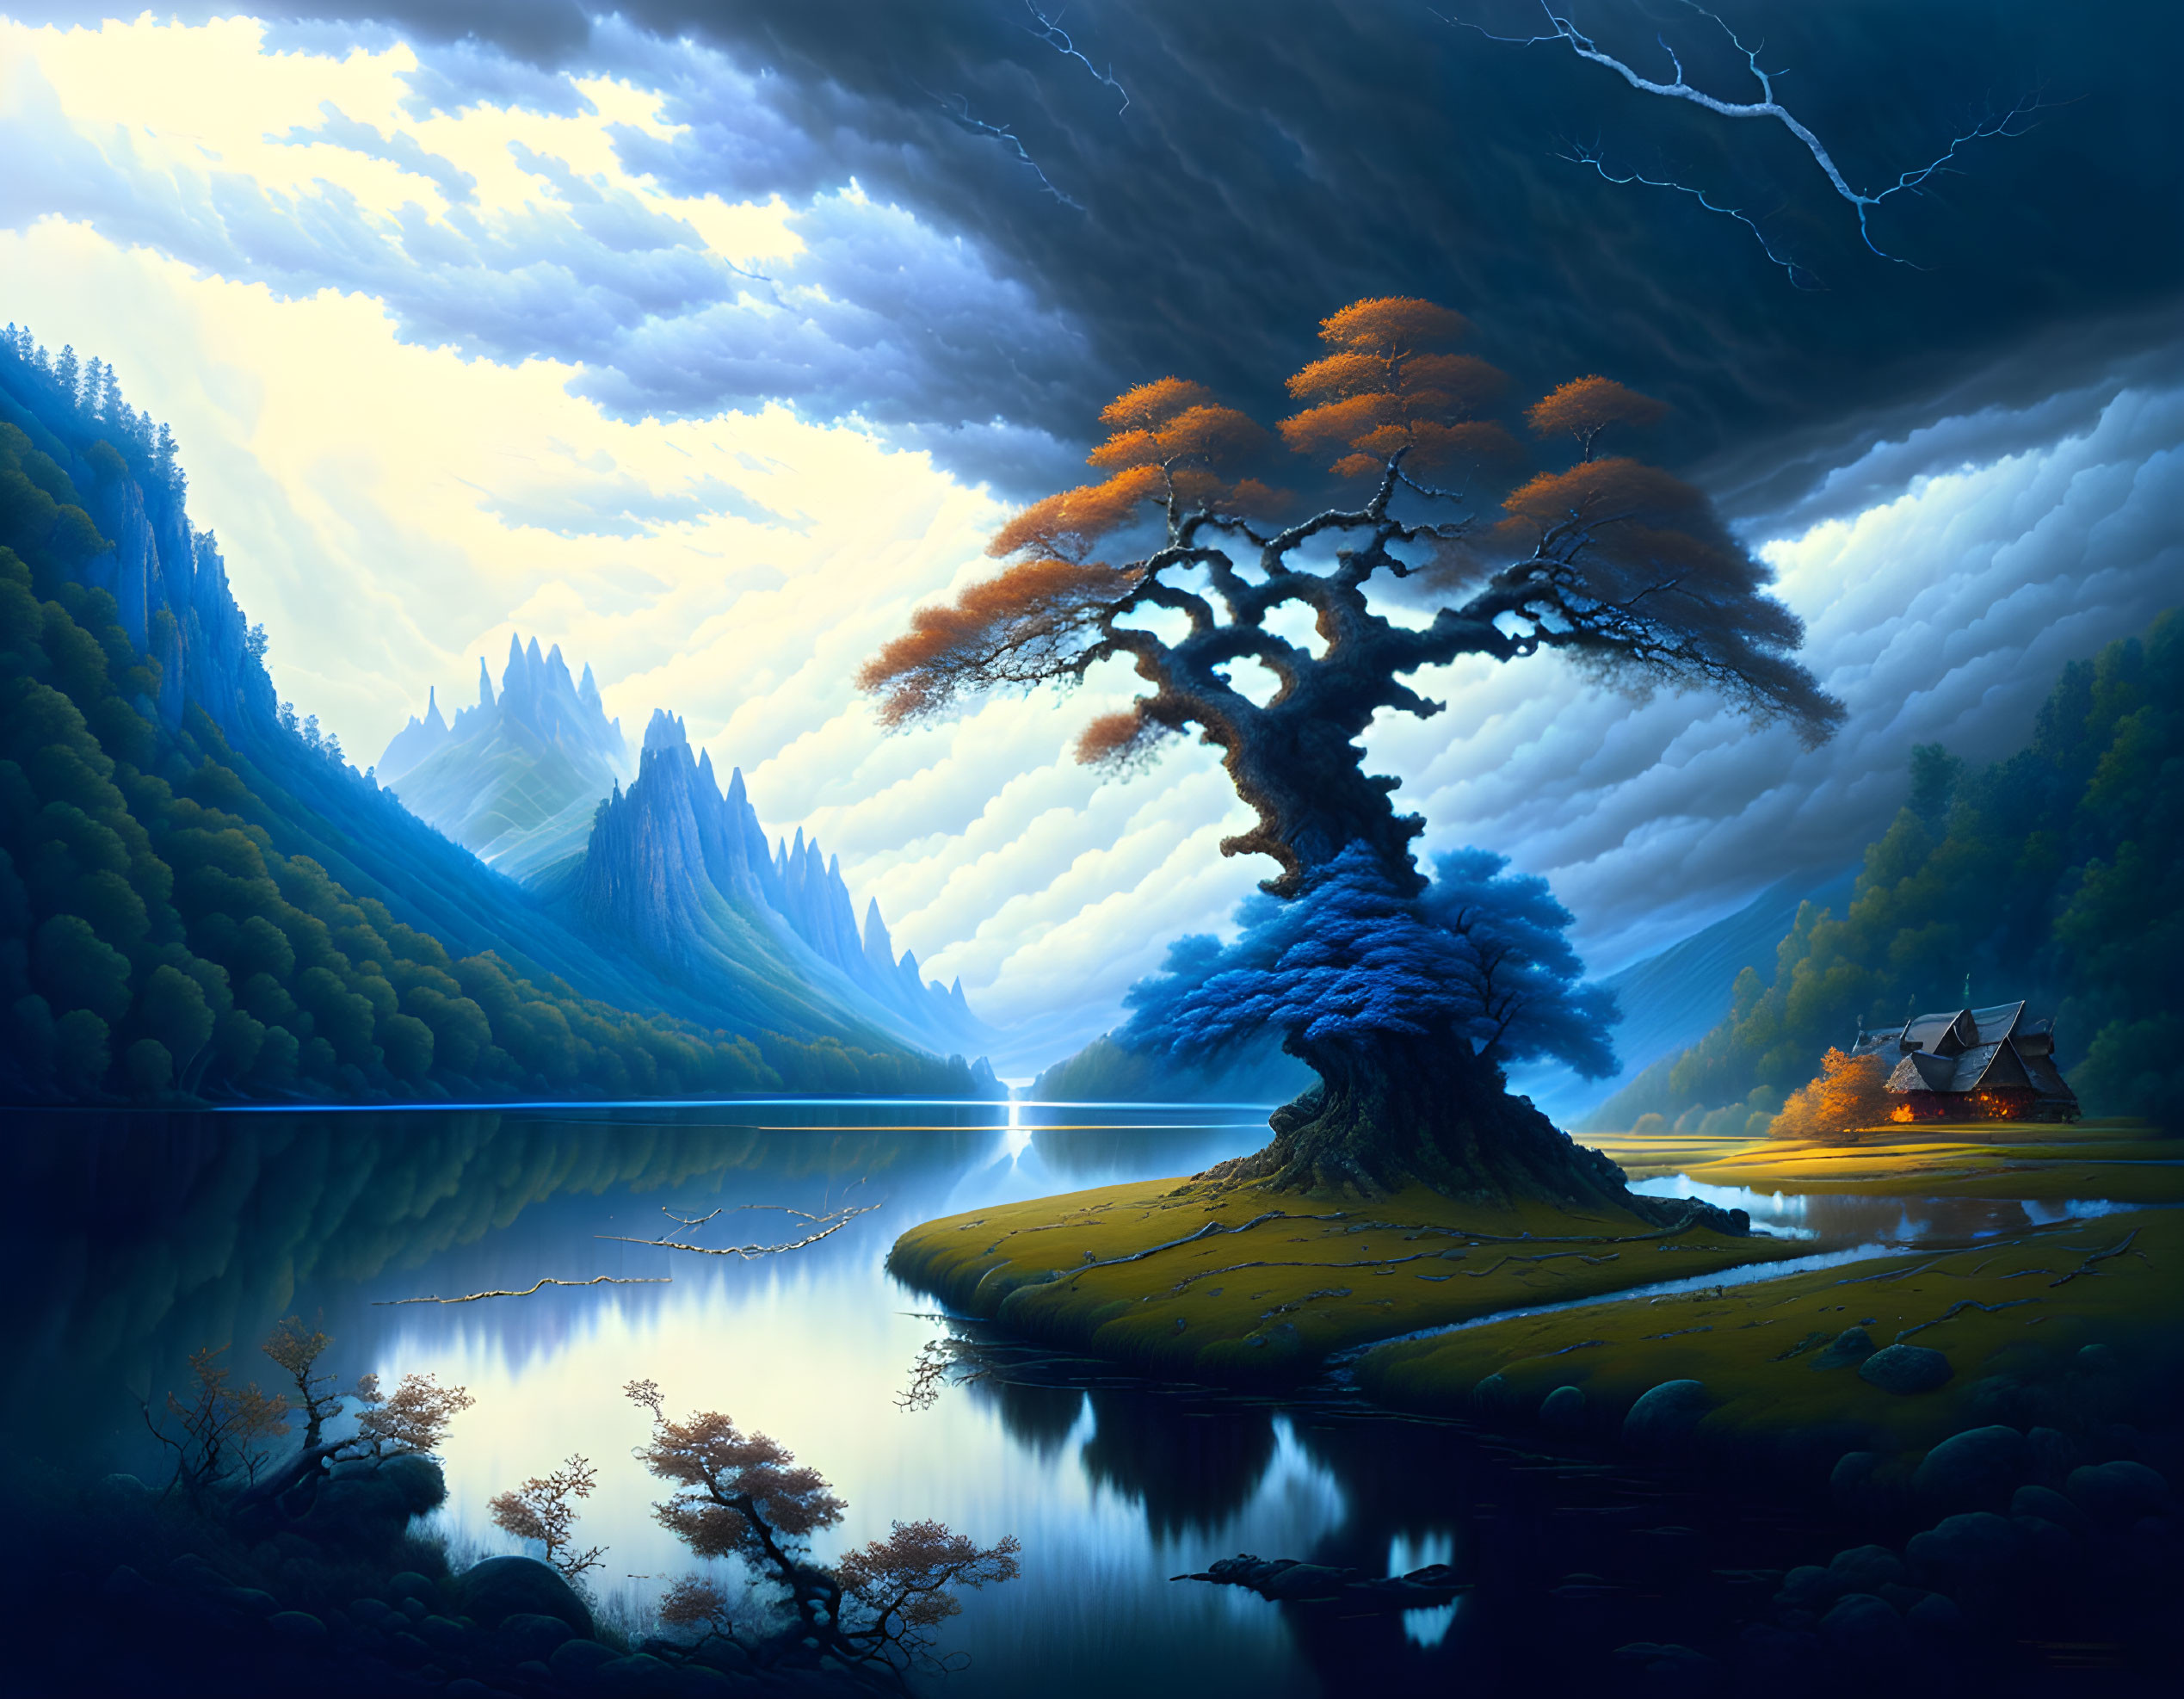 Digital artwork of serene lake with tree on island, surrounded by mountains, clouds, and lightning.